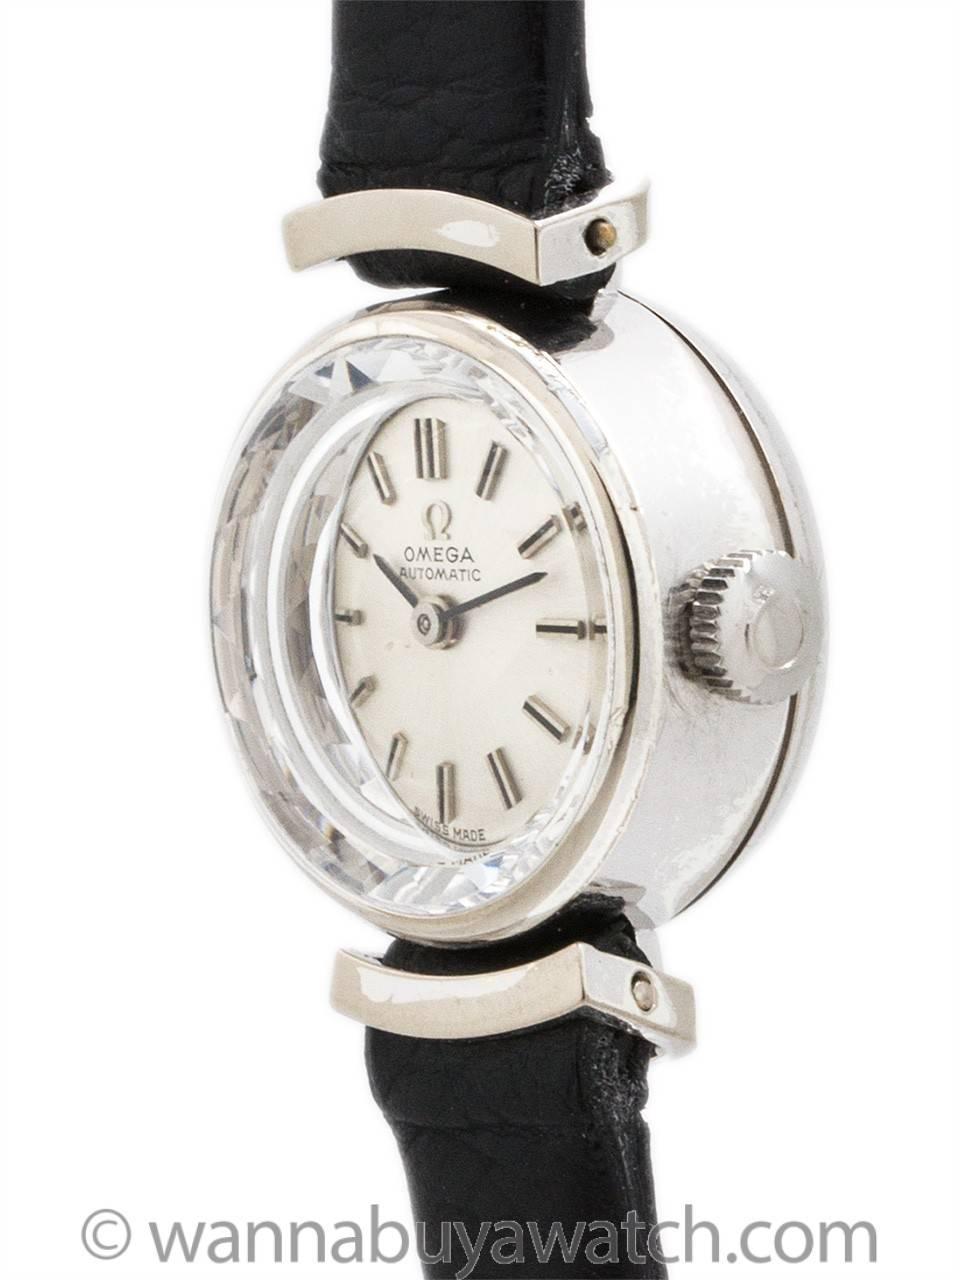 Lady Omega 14K white gold dress model circa 1960’s. Featuring 18 X 24mm case with very attractive case design with “floating” curved lugs matching shaped of case. With diamond cut glass crystal, original silver satin dial with applied silver